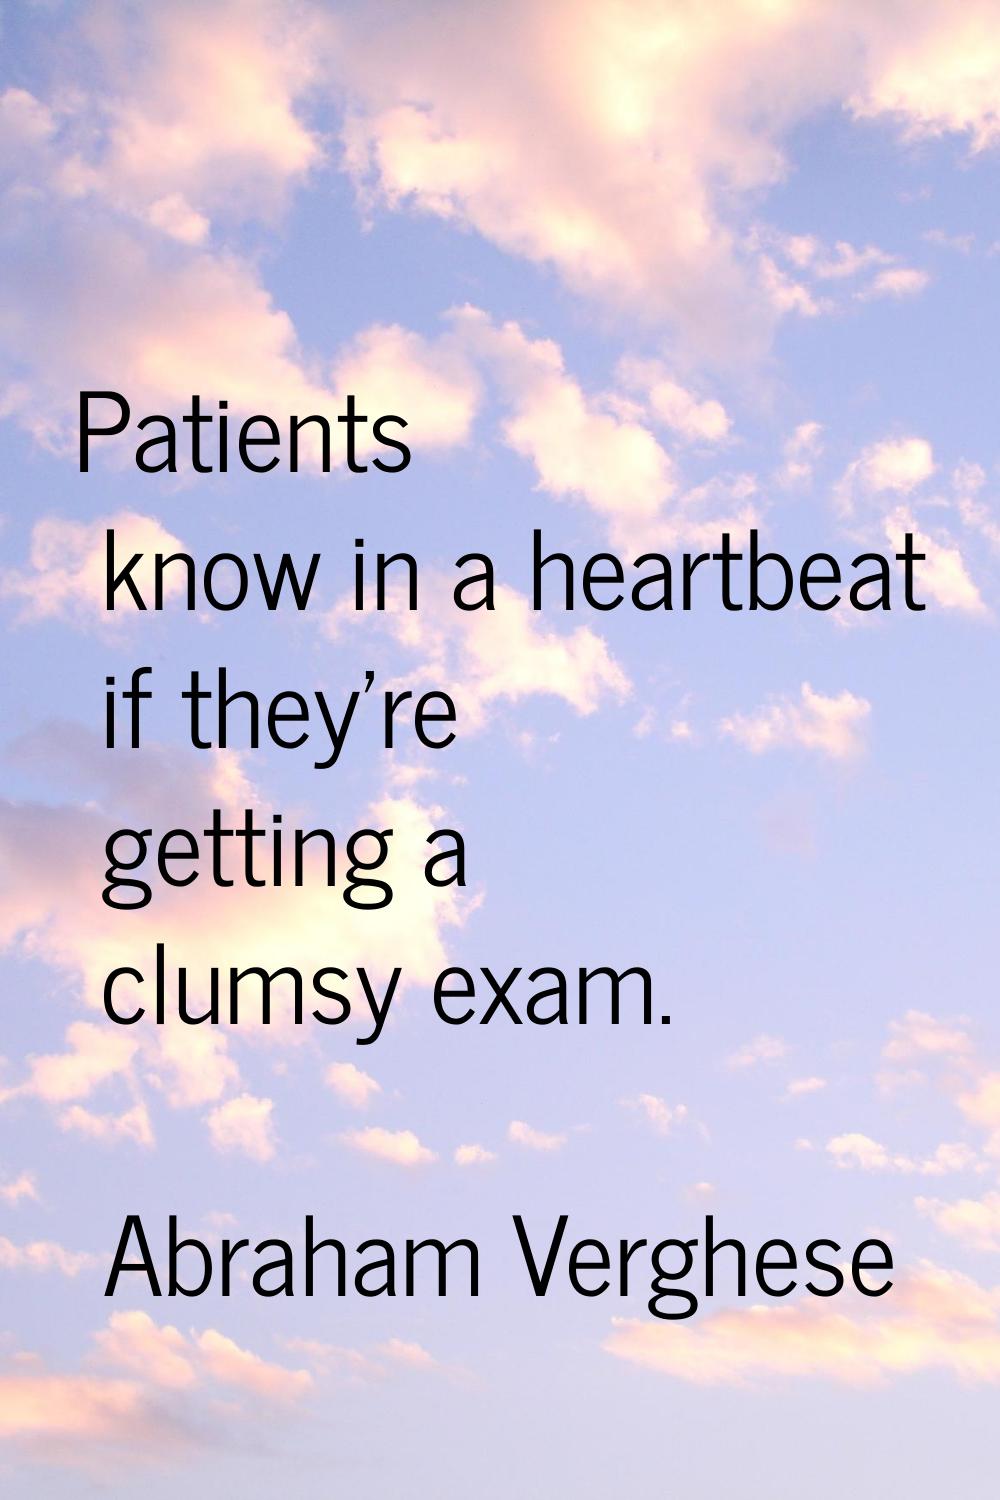 Patients know in a heartbeat if they're getting a clumsy exam.